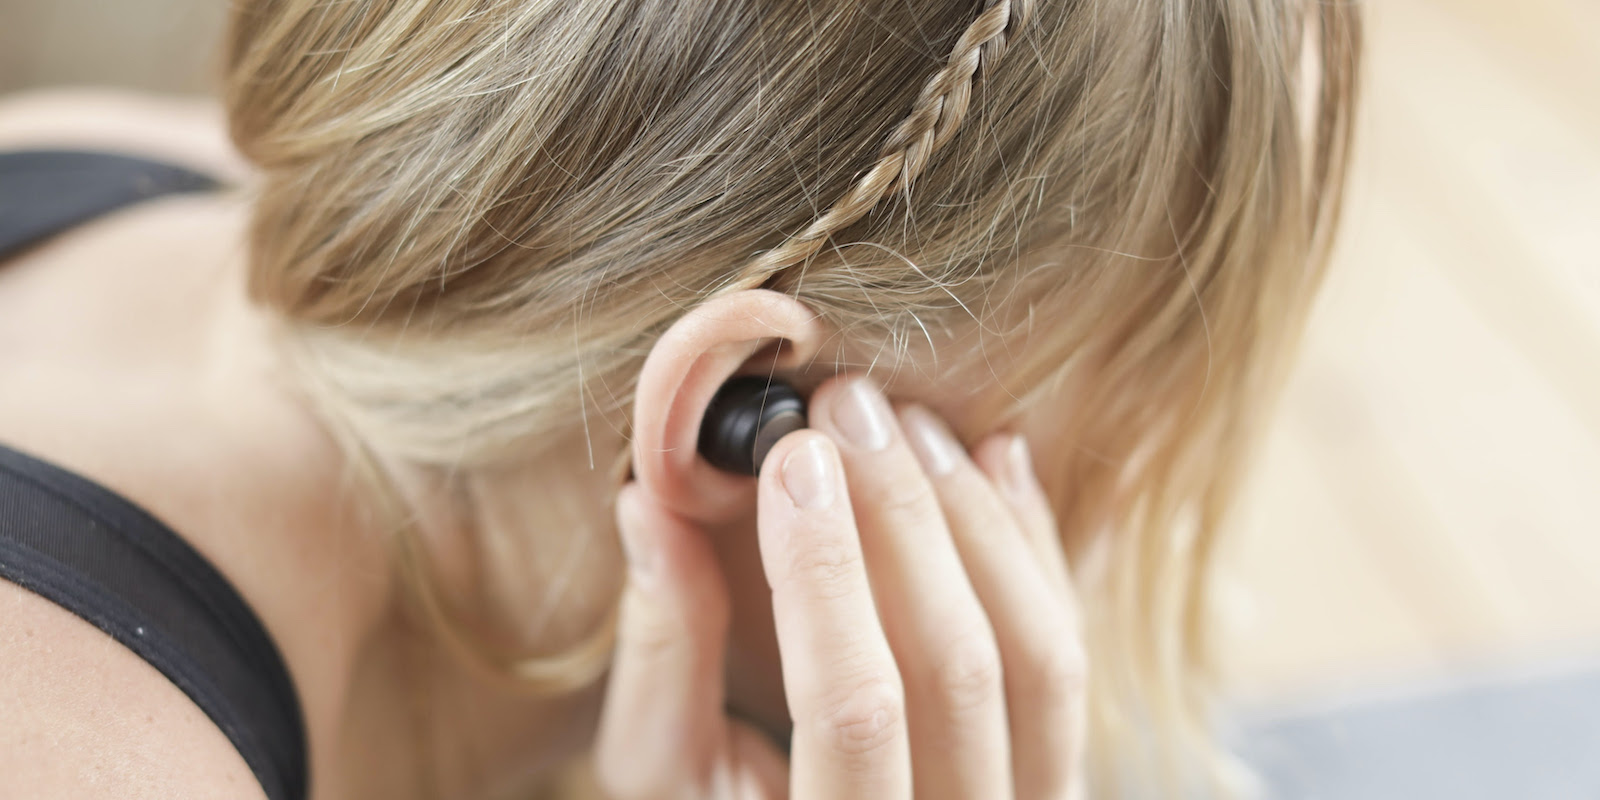 A photograph of a young white woman with blond hair from behind shows her holding an earpiece into her ear.